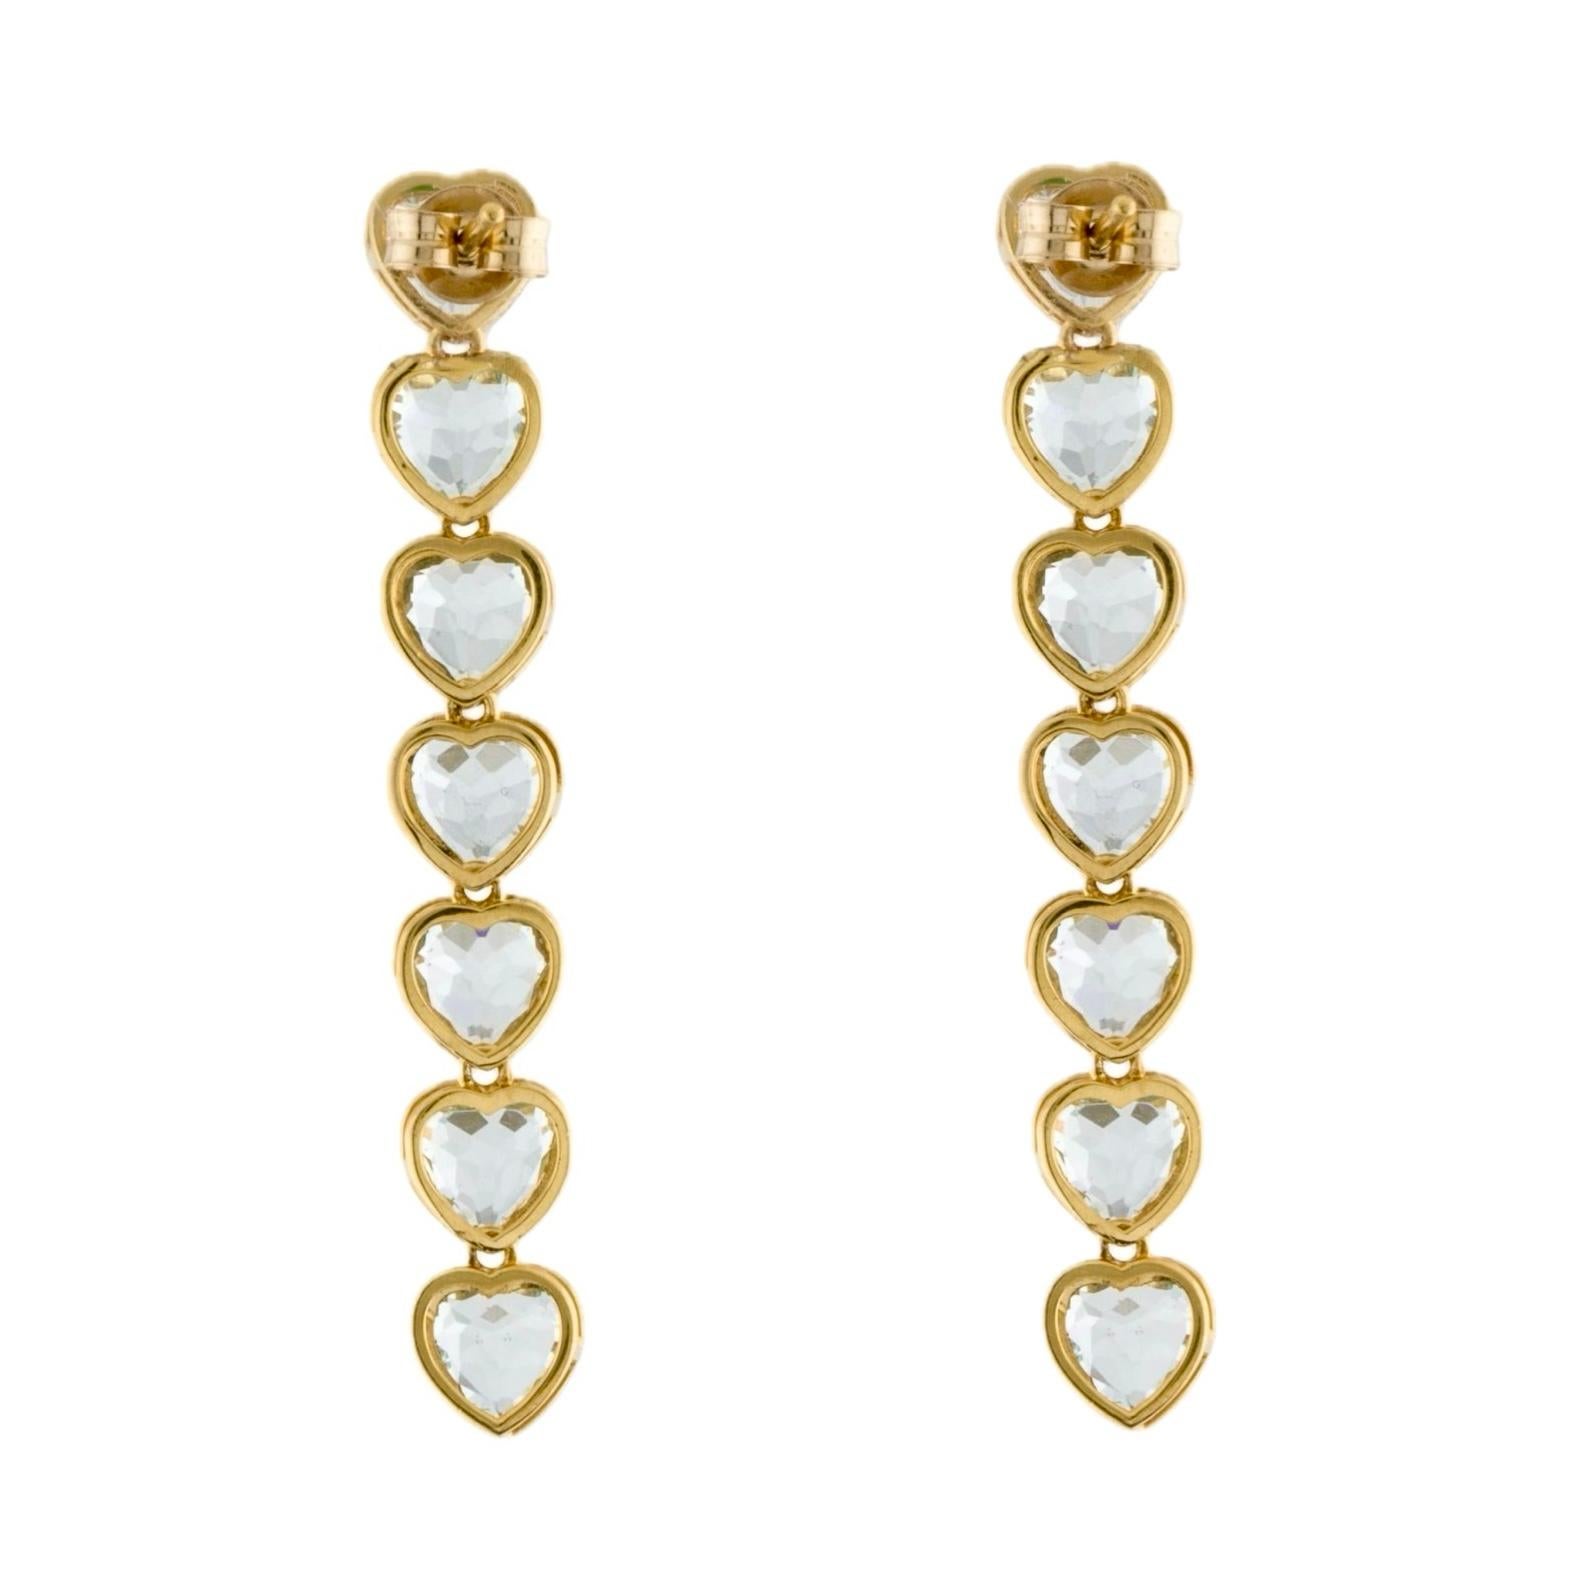 Dive into the romantic depths of Nina Zhou's Heart Shaped Aquamarine Line Drop Earrings, exquisitely set in lustrous 14k yellow gold. These masterpieces are a testament to love's eternal flow, featuring ethereal heart-shaped aquamarines that cascade